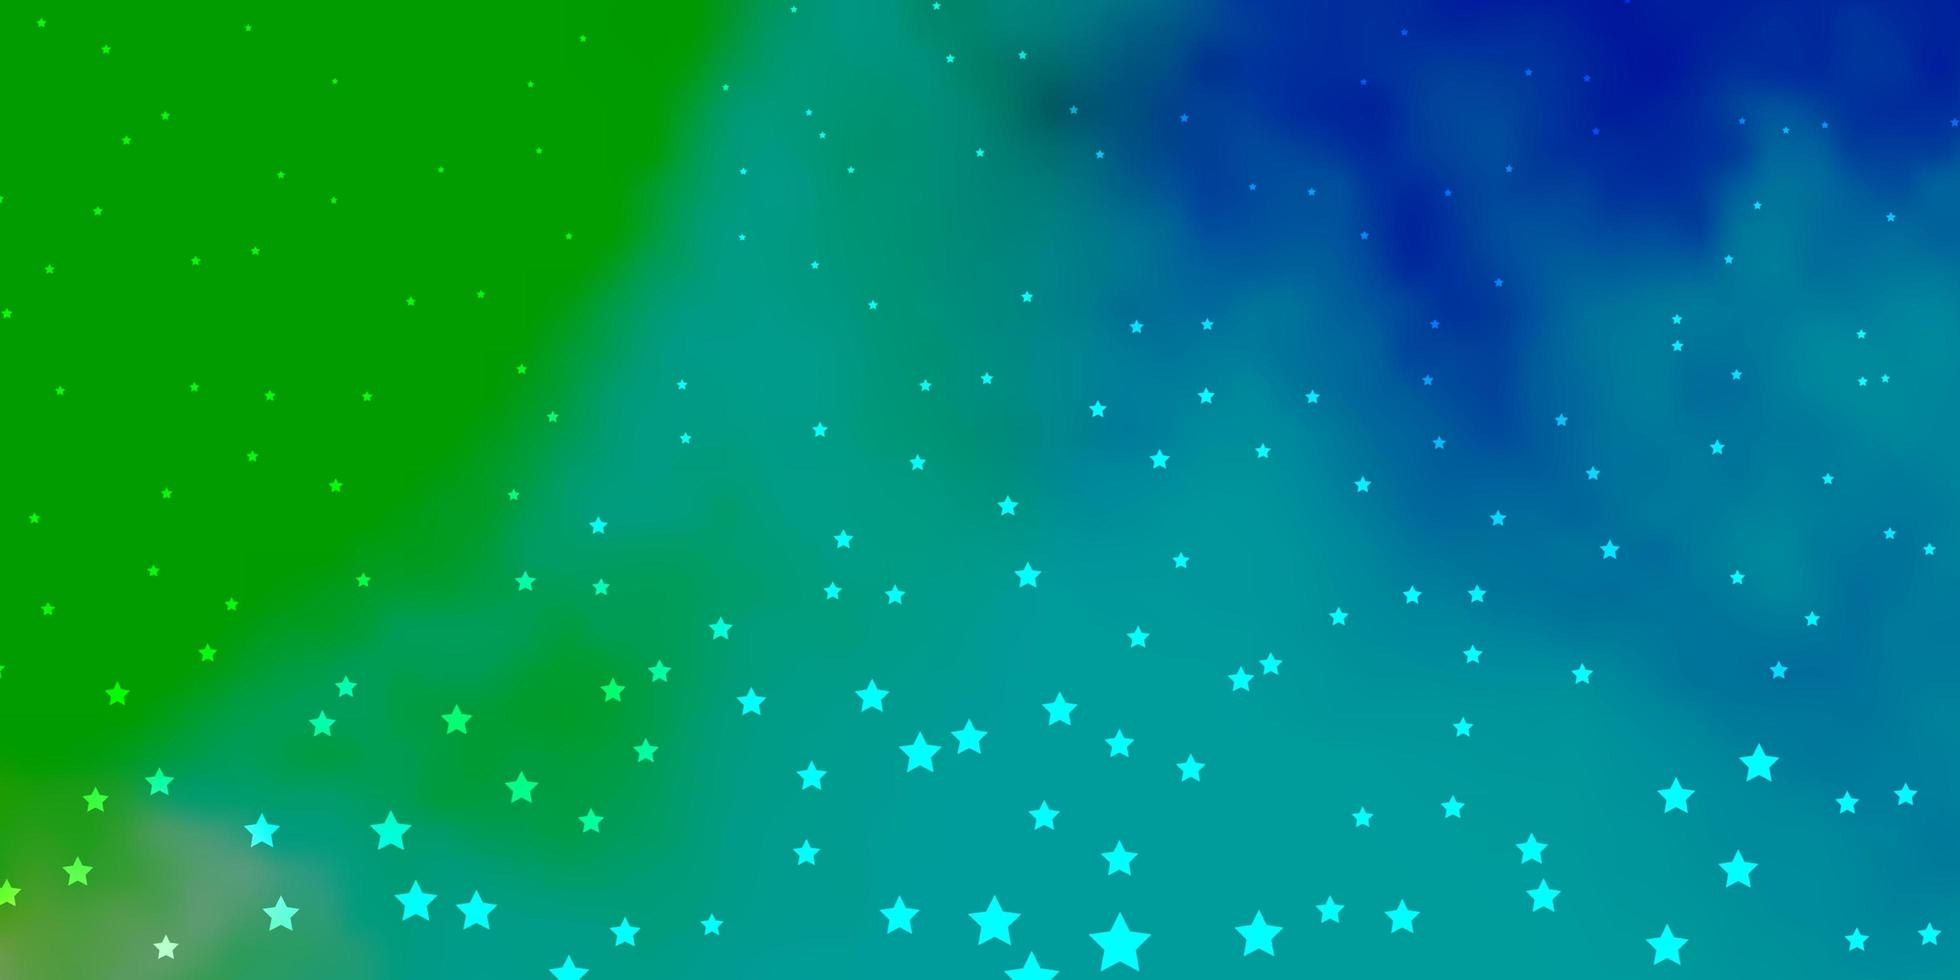 Dark Blue, Green vector pattern with abstract stars.